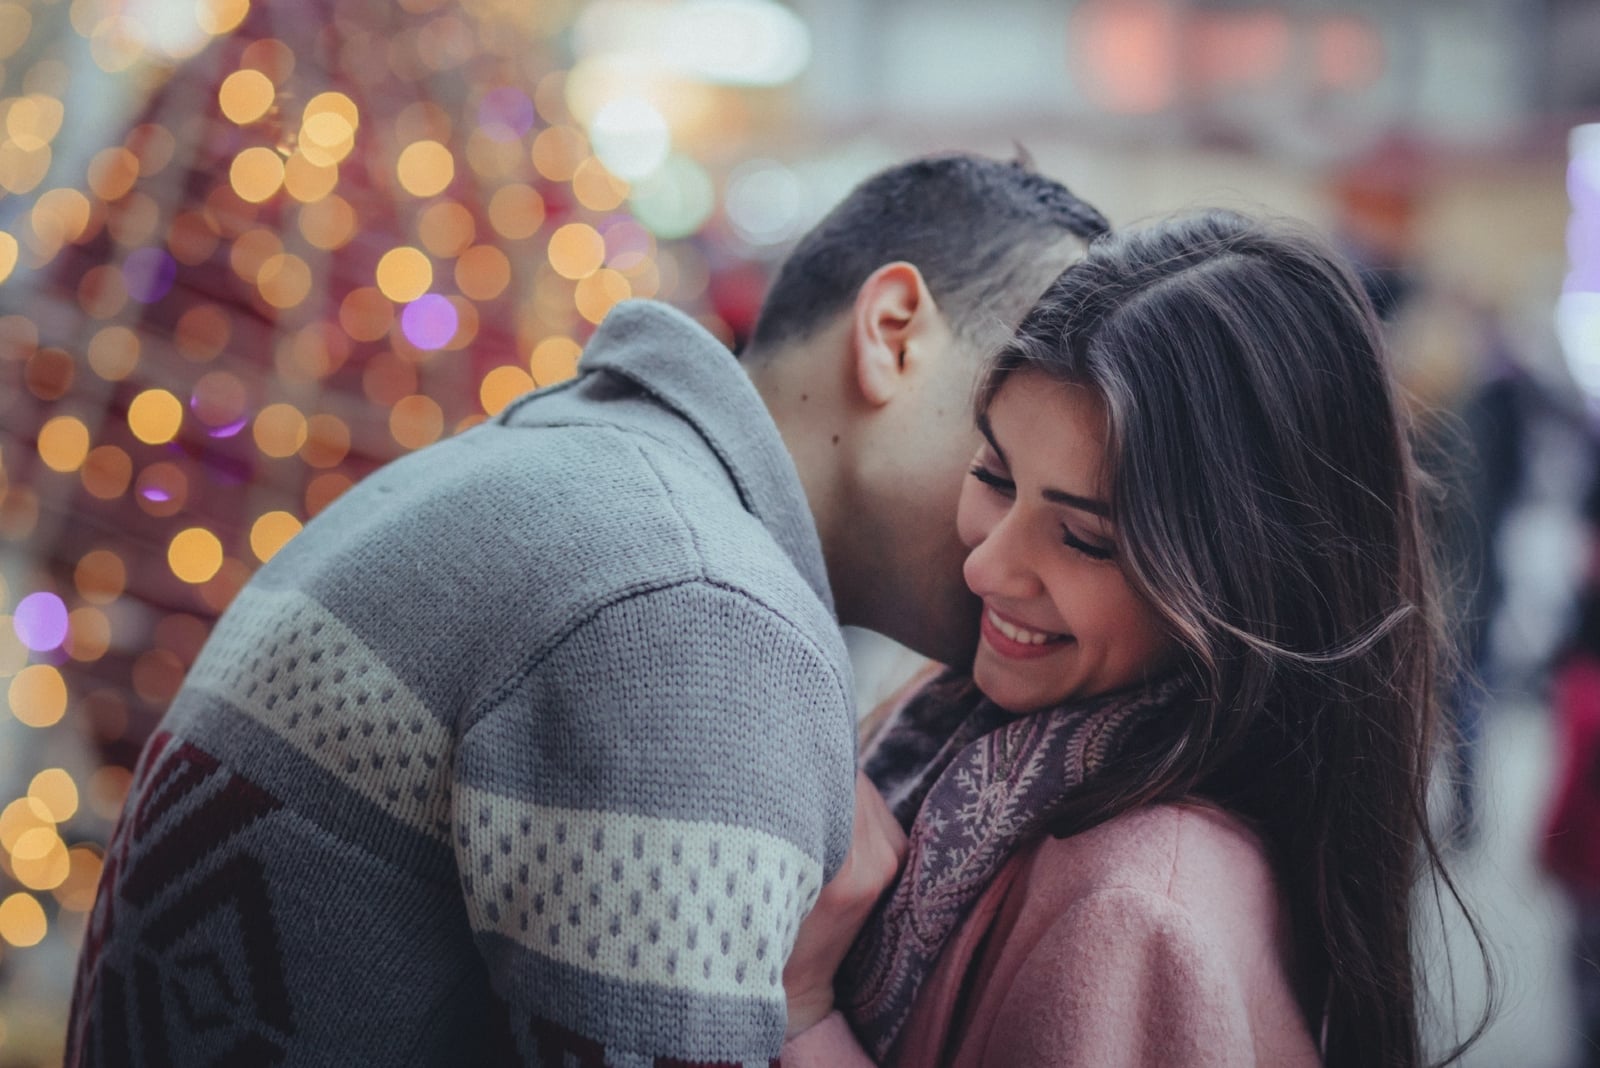 man in gray sweater kissing woman's neck while standing outdoor